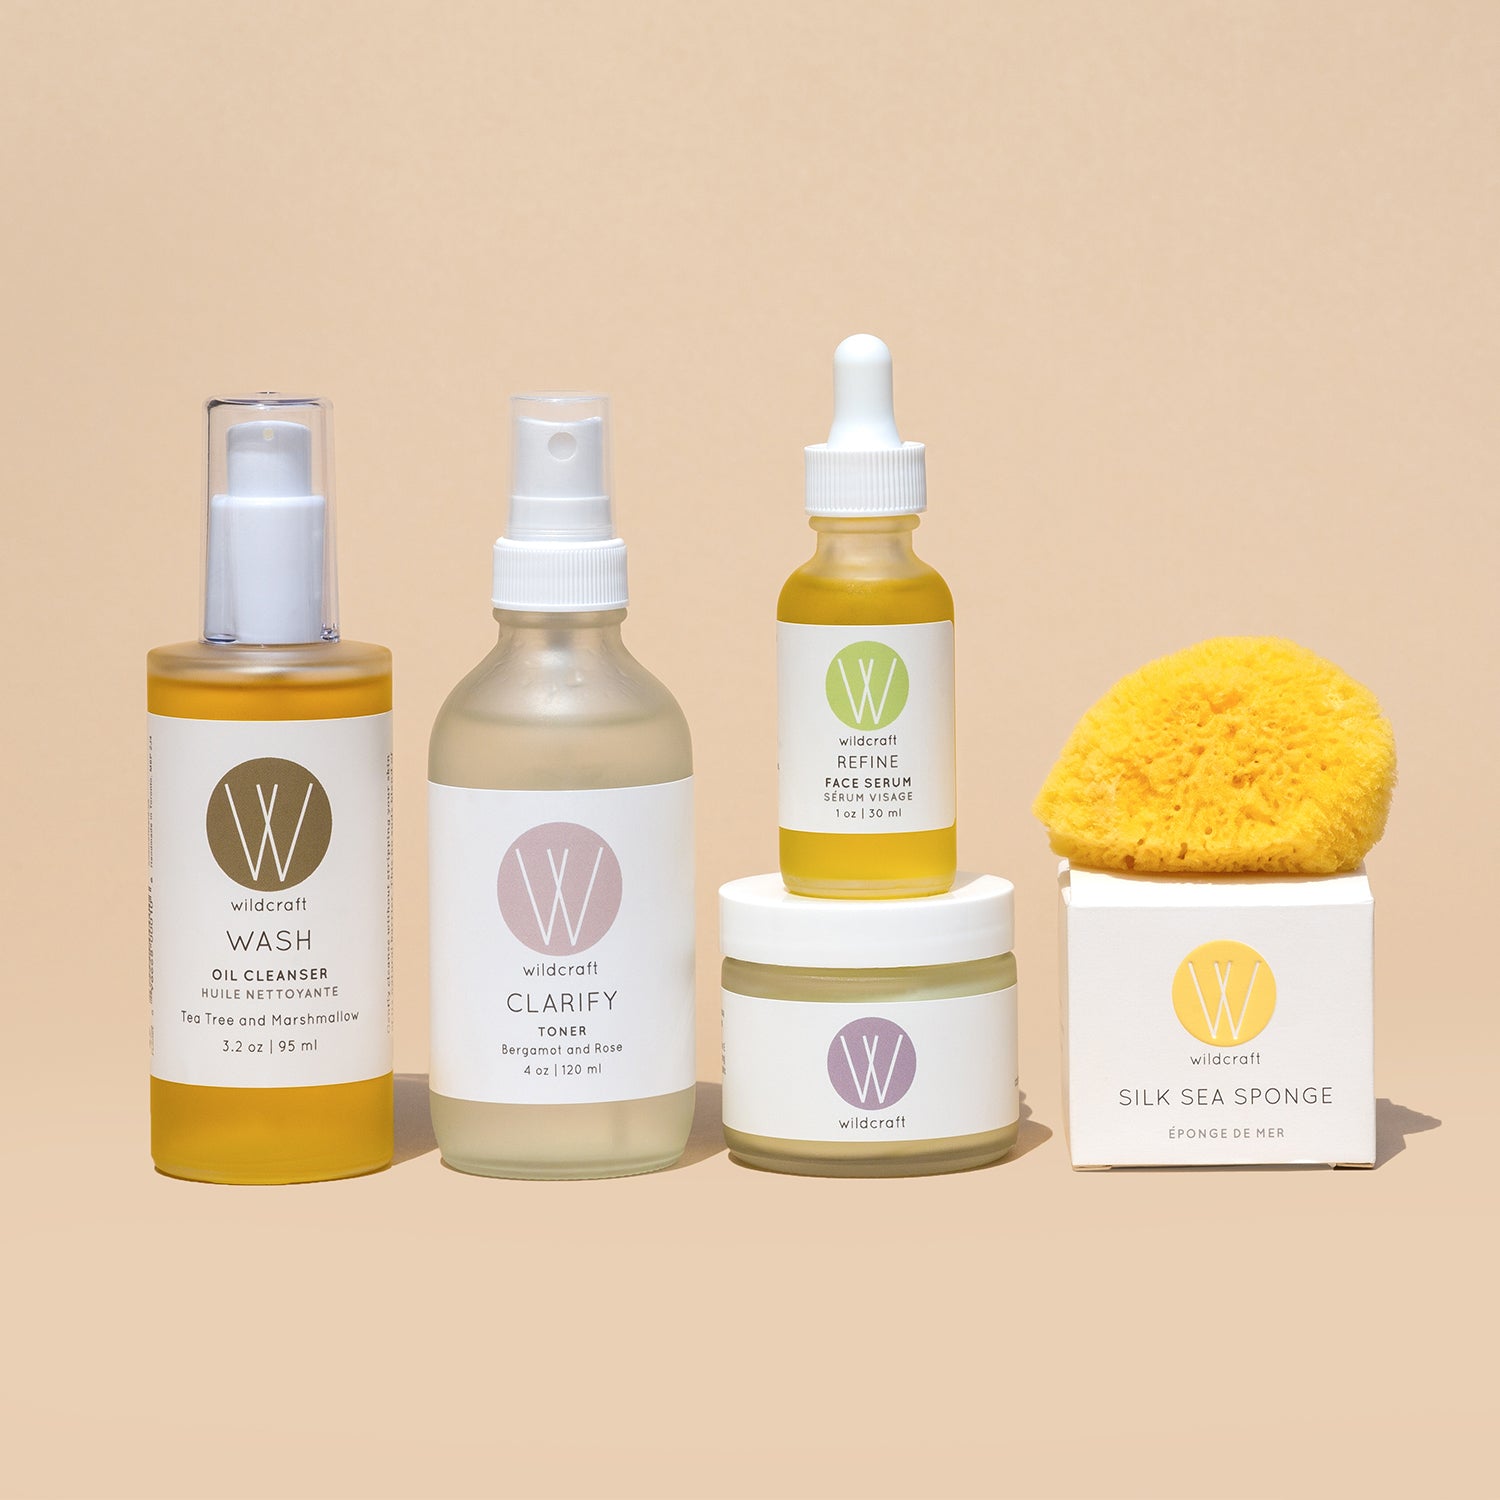 Contents of the Sensitive Skincare Set